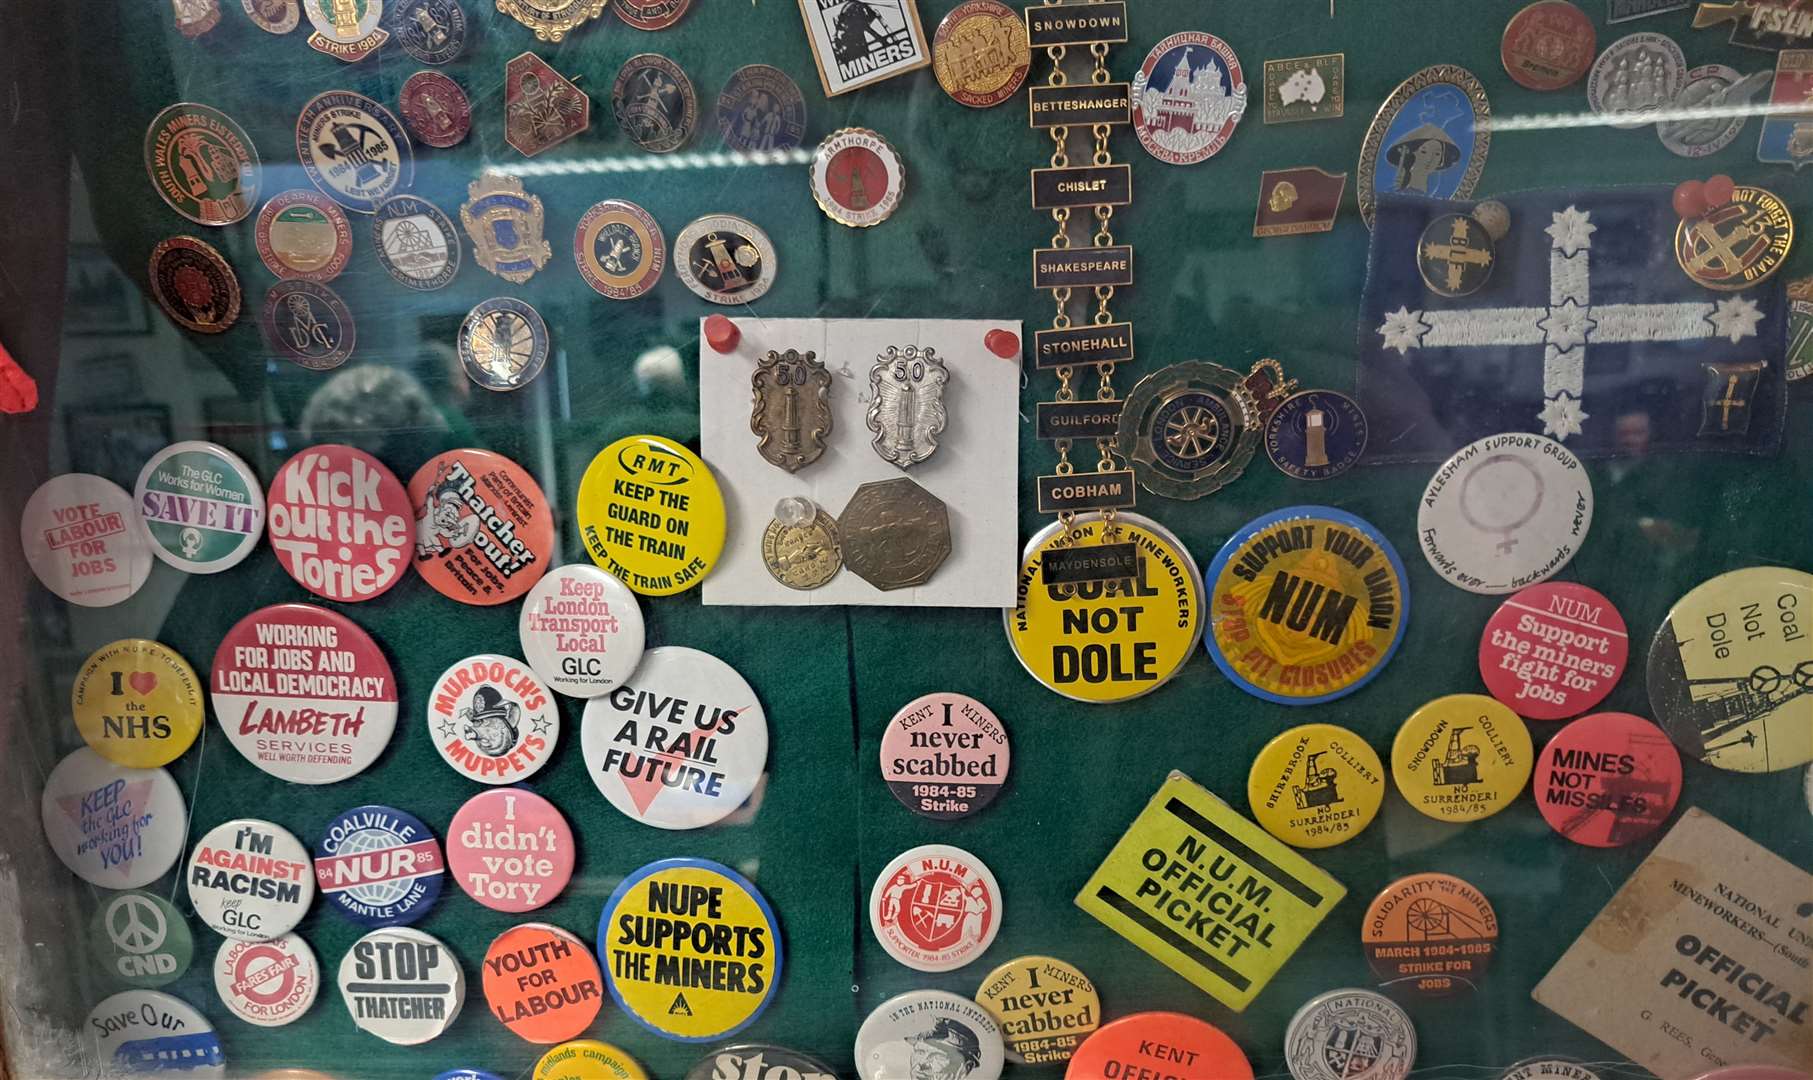 Campaign badges from the time of the 1984 miners' strike